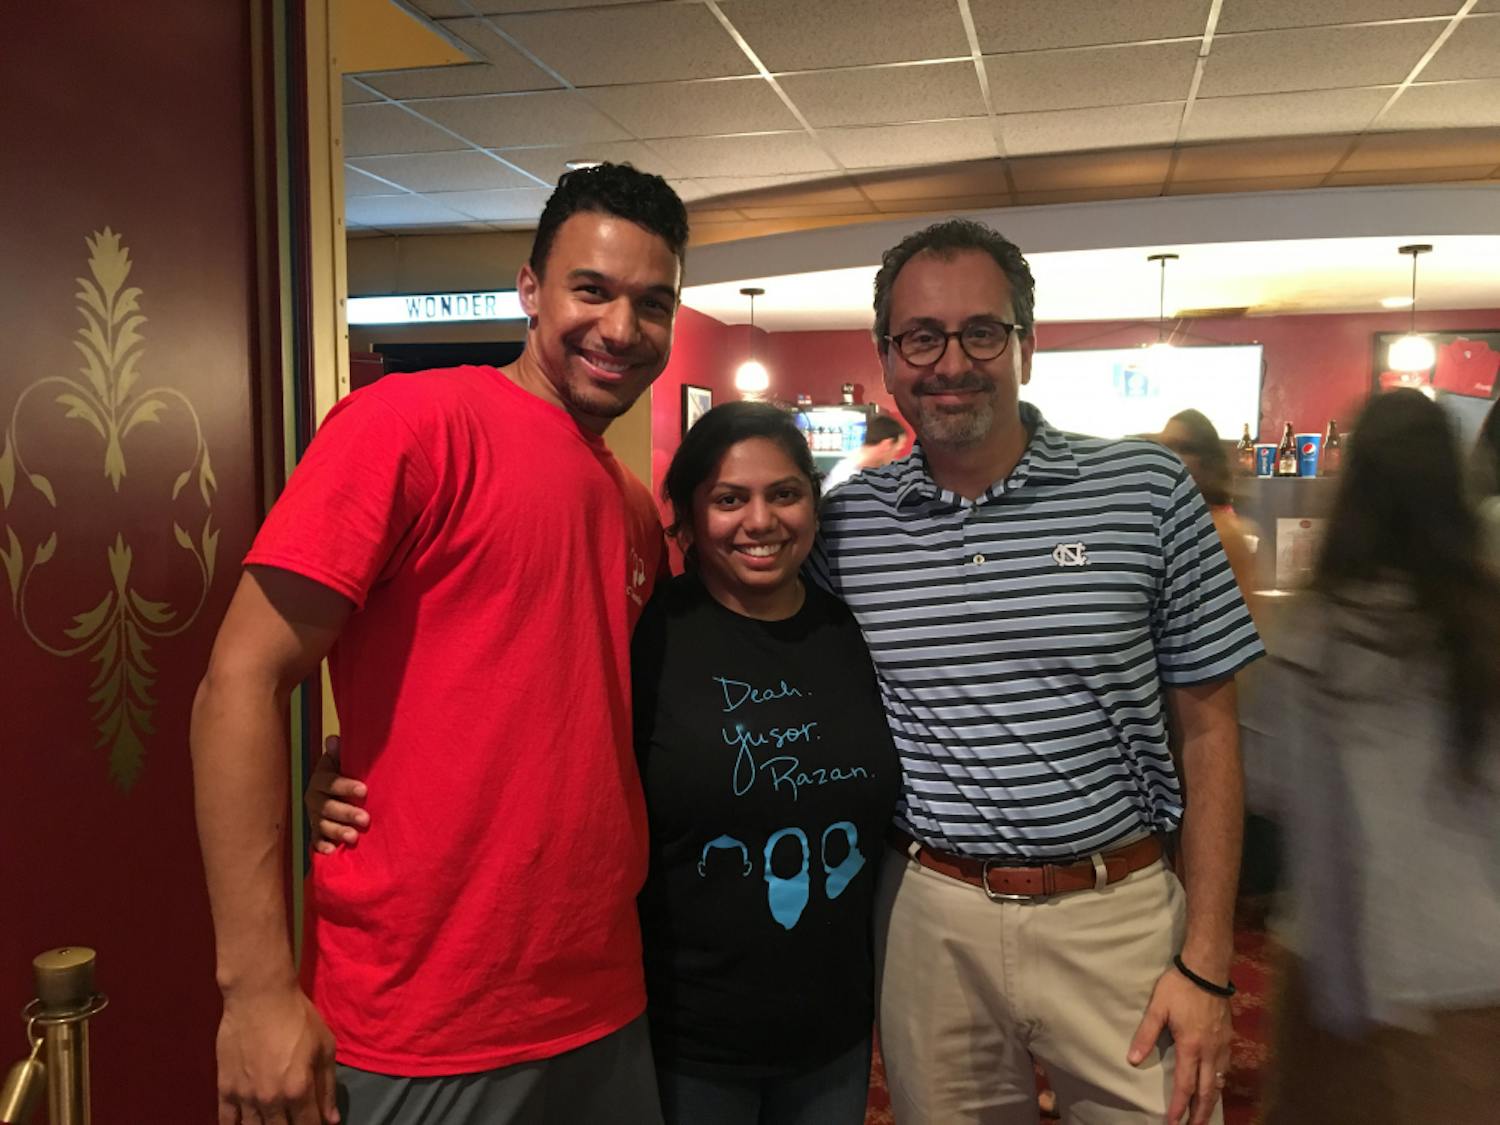 Jordan Sawyers, Kaushal Ghandi and School of Dentistry Dean Scott De Rossi pose at the Varisty Theatre at a talent show in honor of Yusor Mohammad Abu-Salha, &nbsp;Deah Shaddy Barakat and &nbsp;Razan Mohammad Abu-Salha.&nbsp;